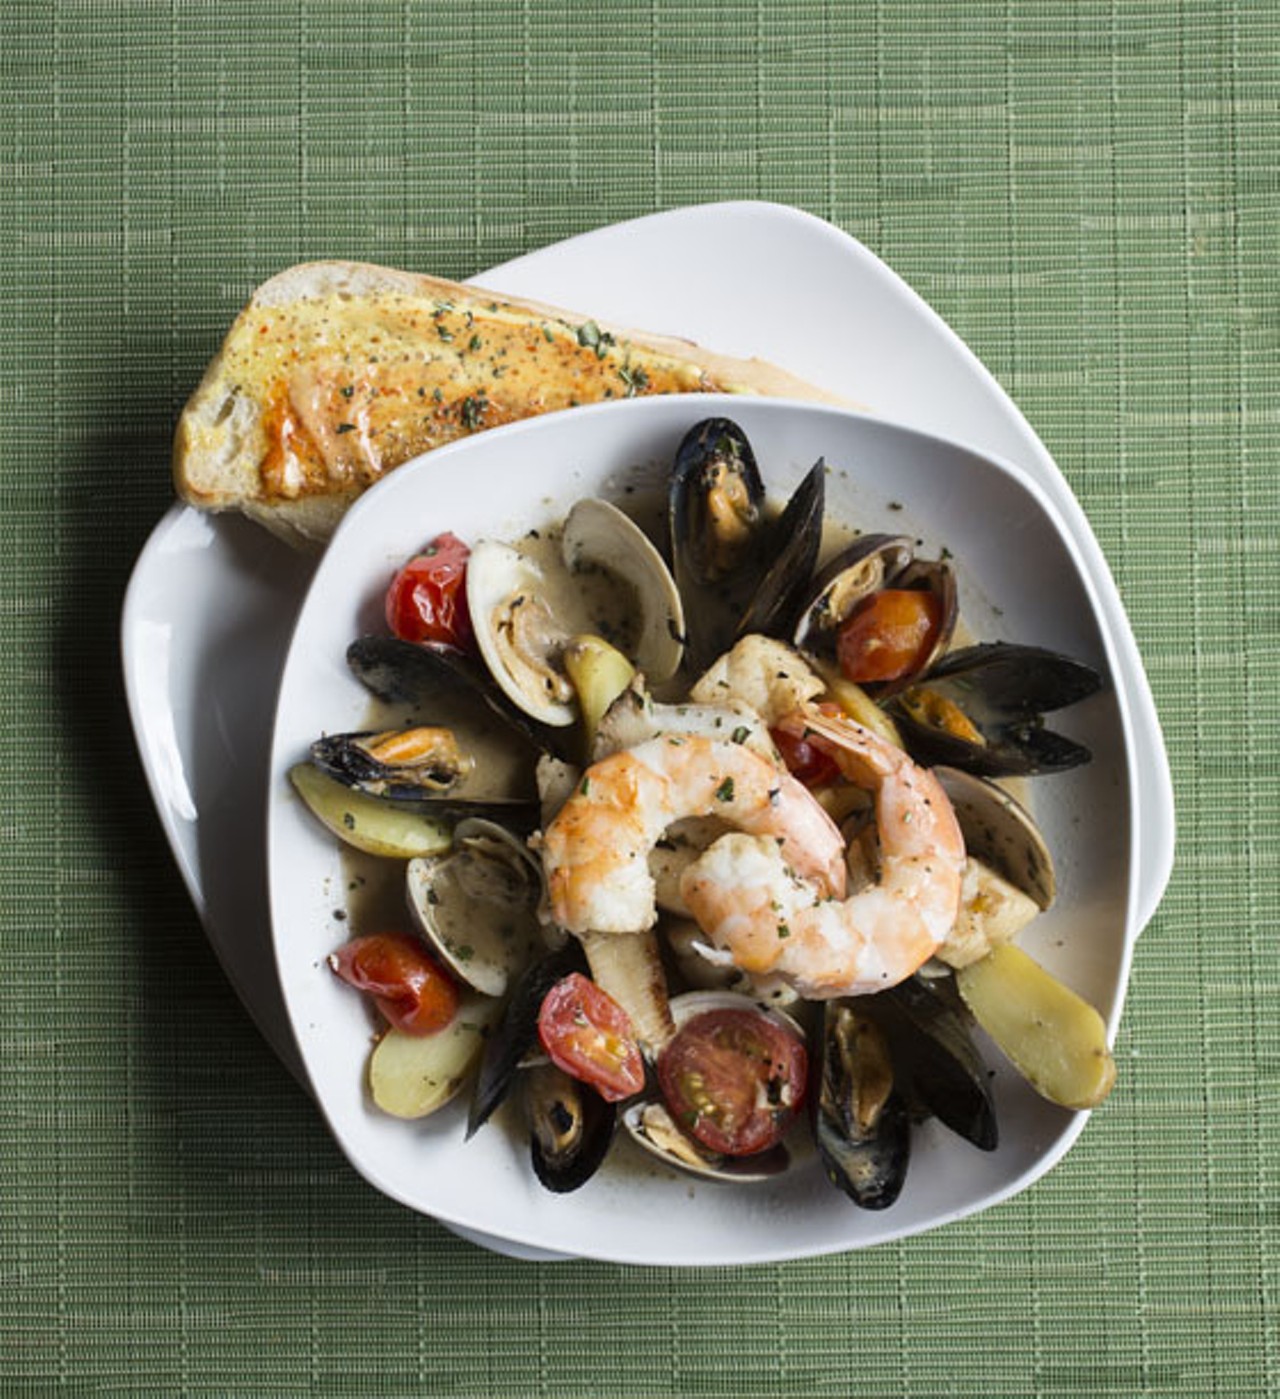 Bouillabaisse comes stocked with shrimp, halibut, mussels and clams.